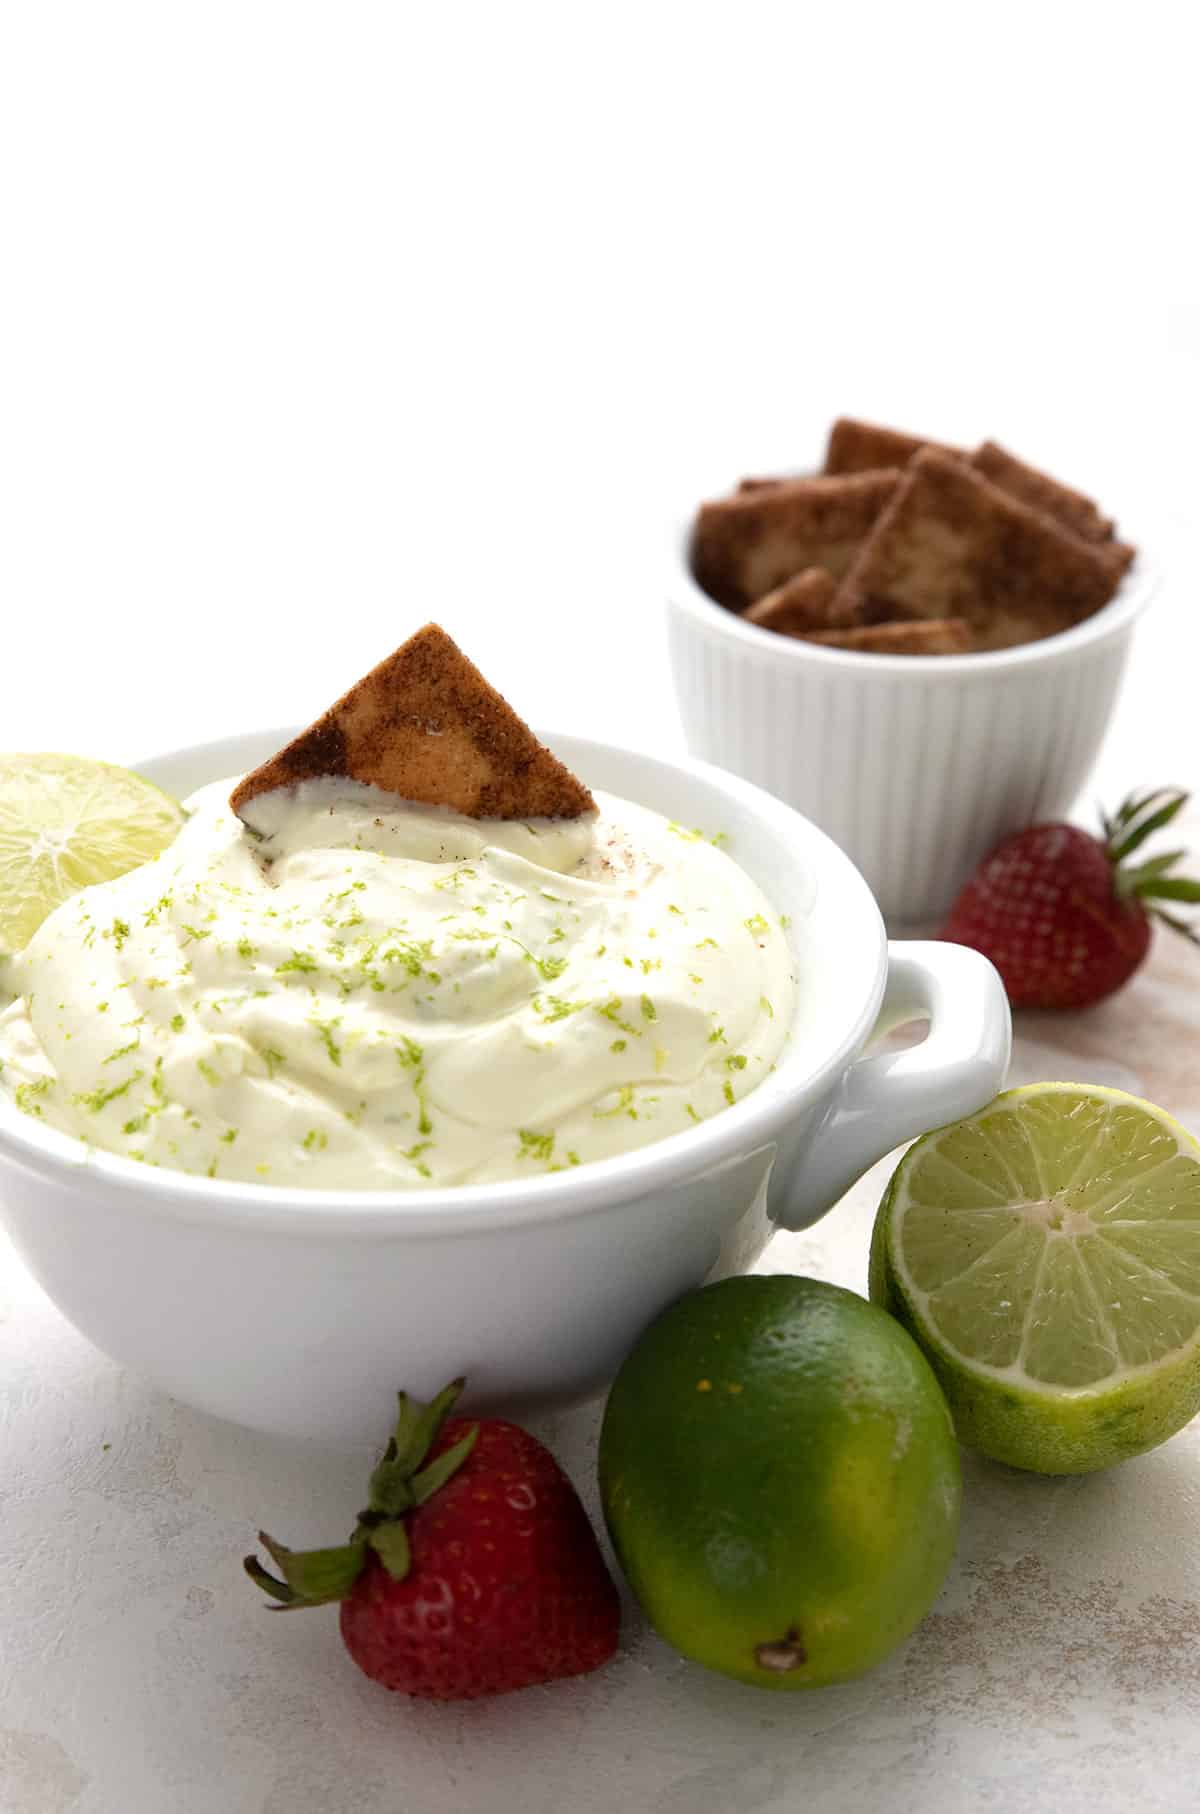 Keto cinnamon crackers being dipped into a bowl of key lime pie dip.